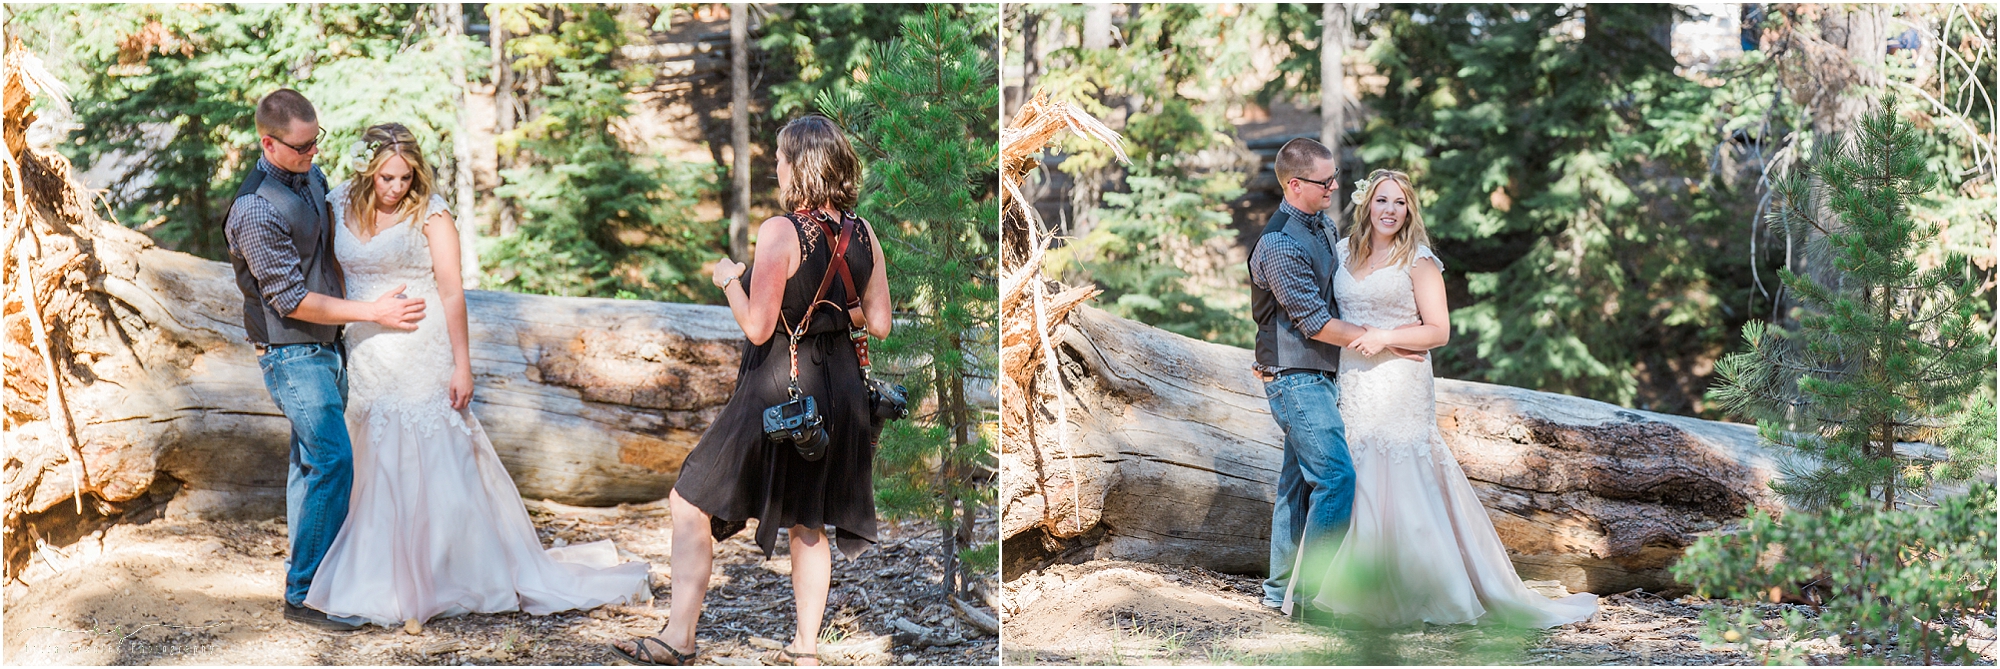 Erica Swantek Photography working to create a beautiful wedding portrait at Skyliner's Lodge in Bend, Oregon. 